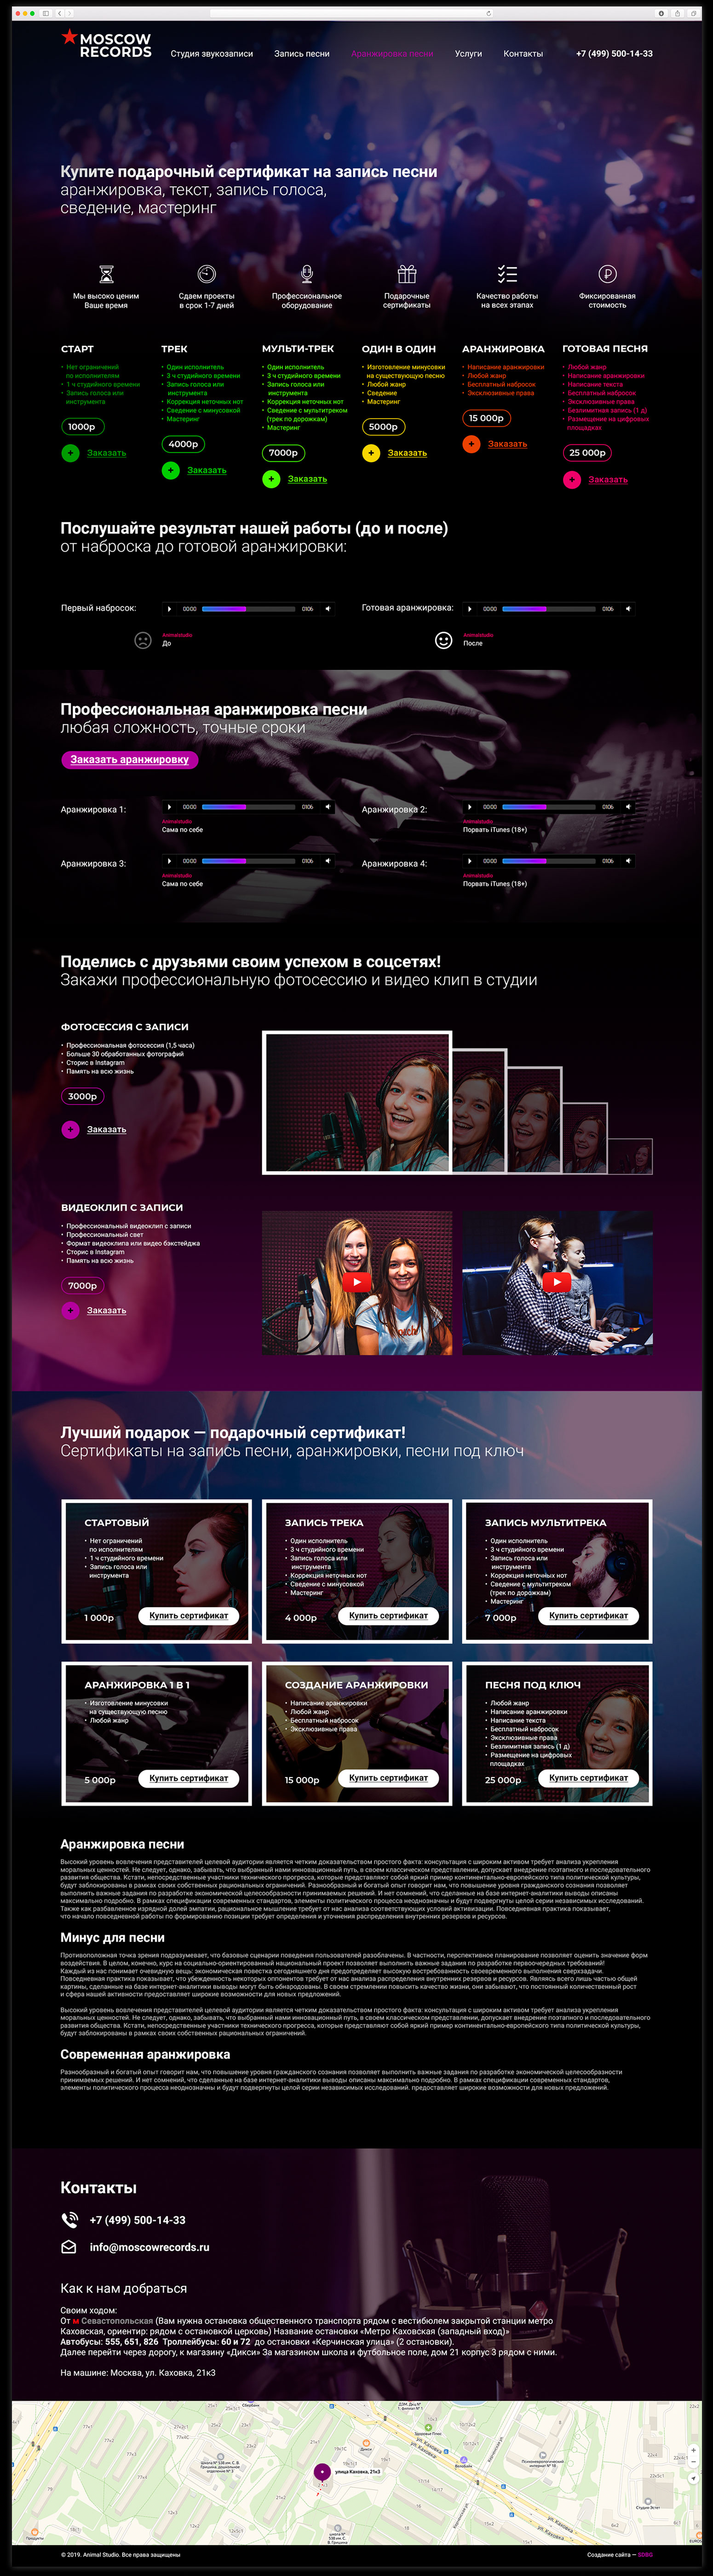 Landing Page des Tonstudios Moscow Records